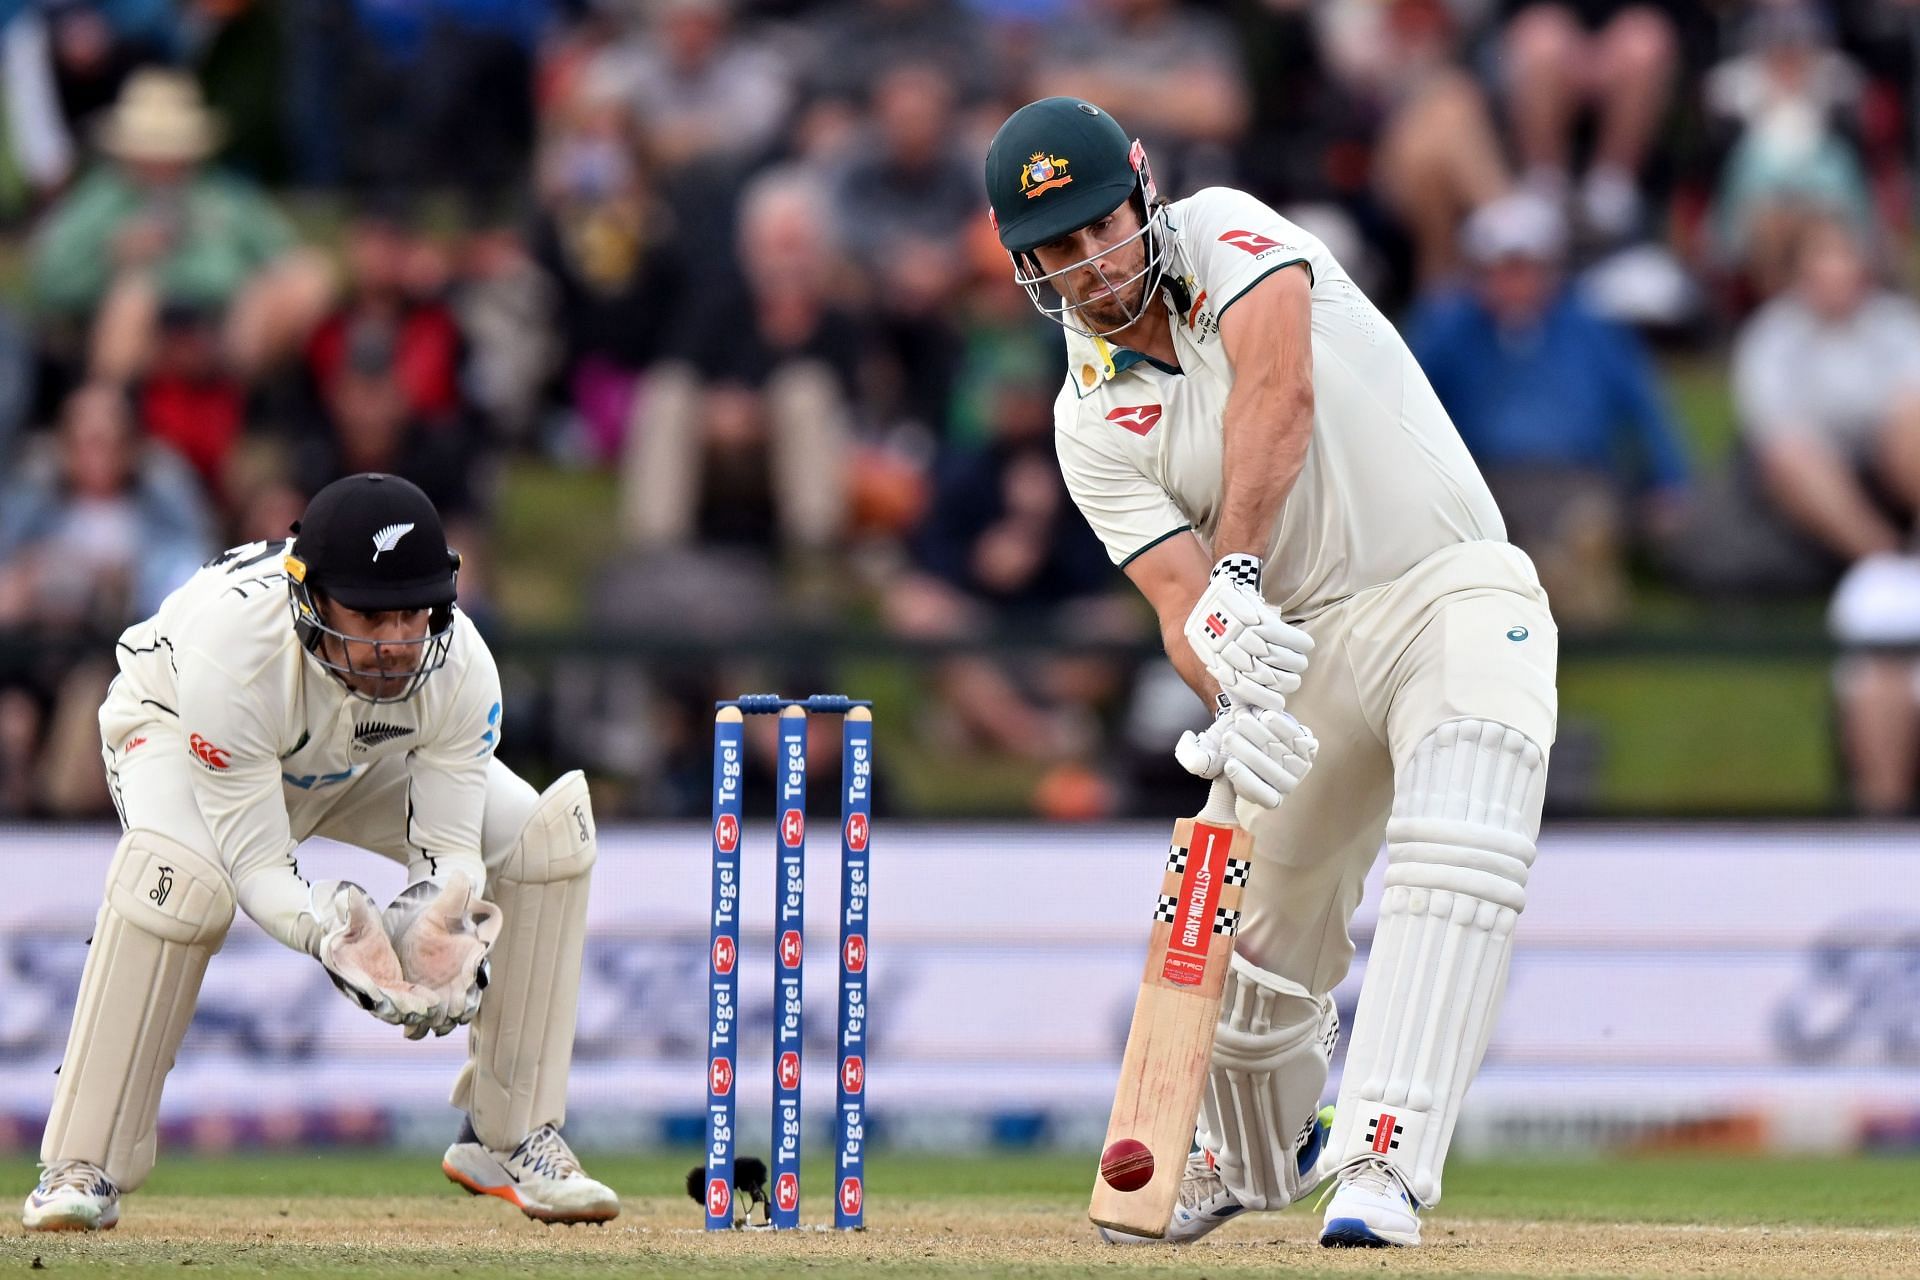 Mitchell Marsh played aggressively from the outset. (Credits: Getty)